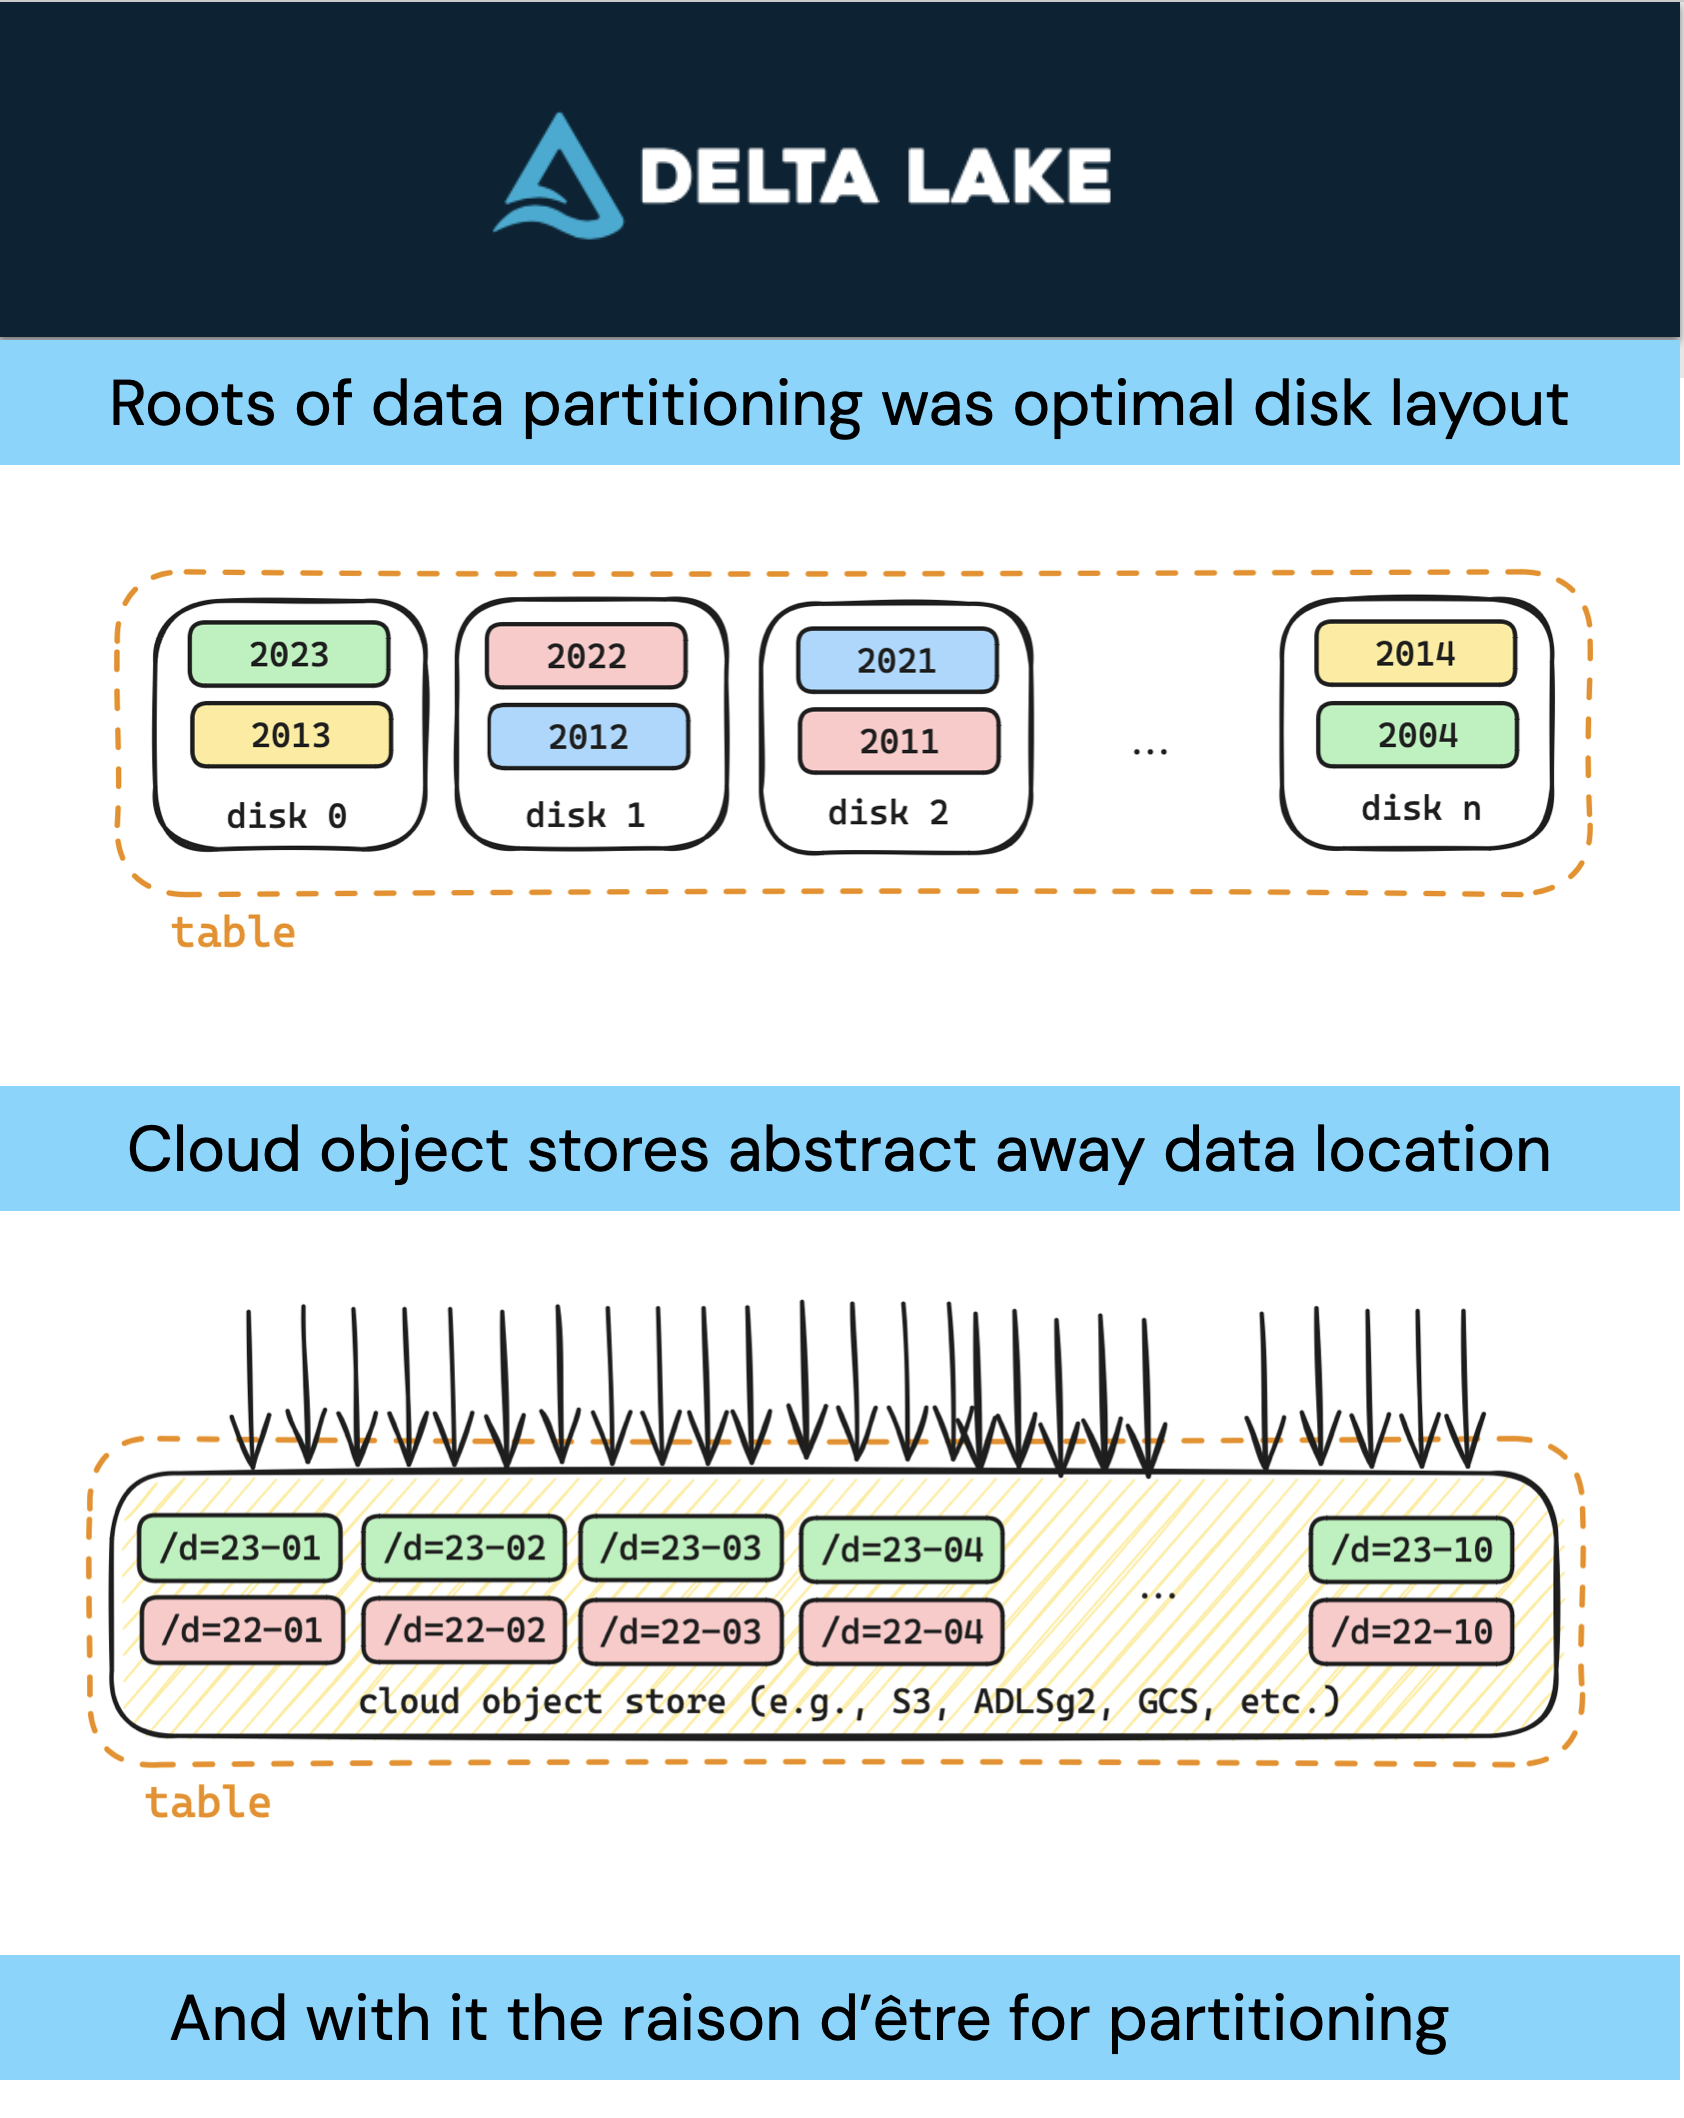 Organizing Data: Partition by Disk to Hive-style Partitioning